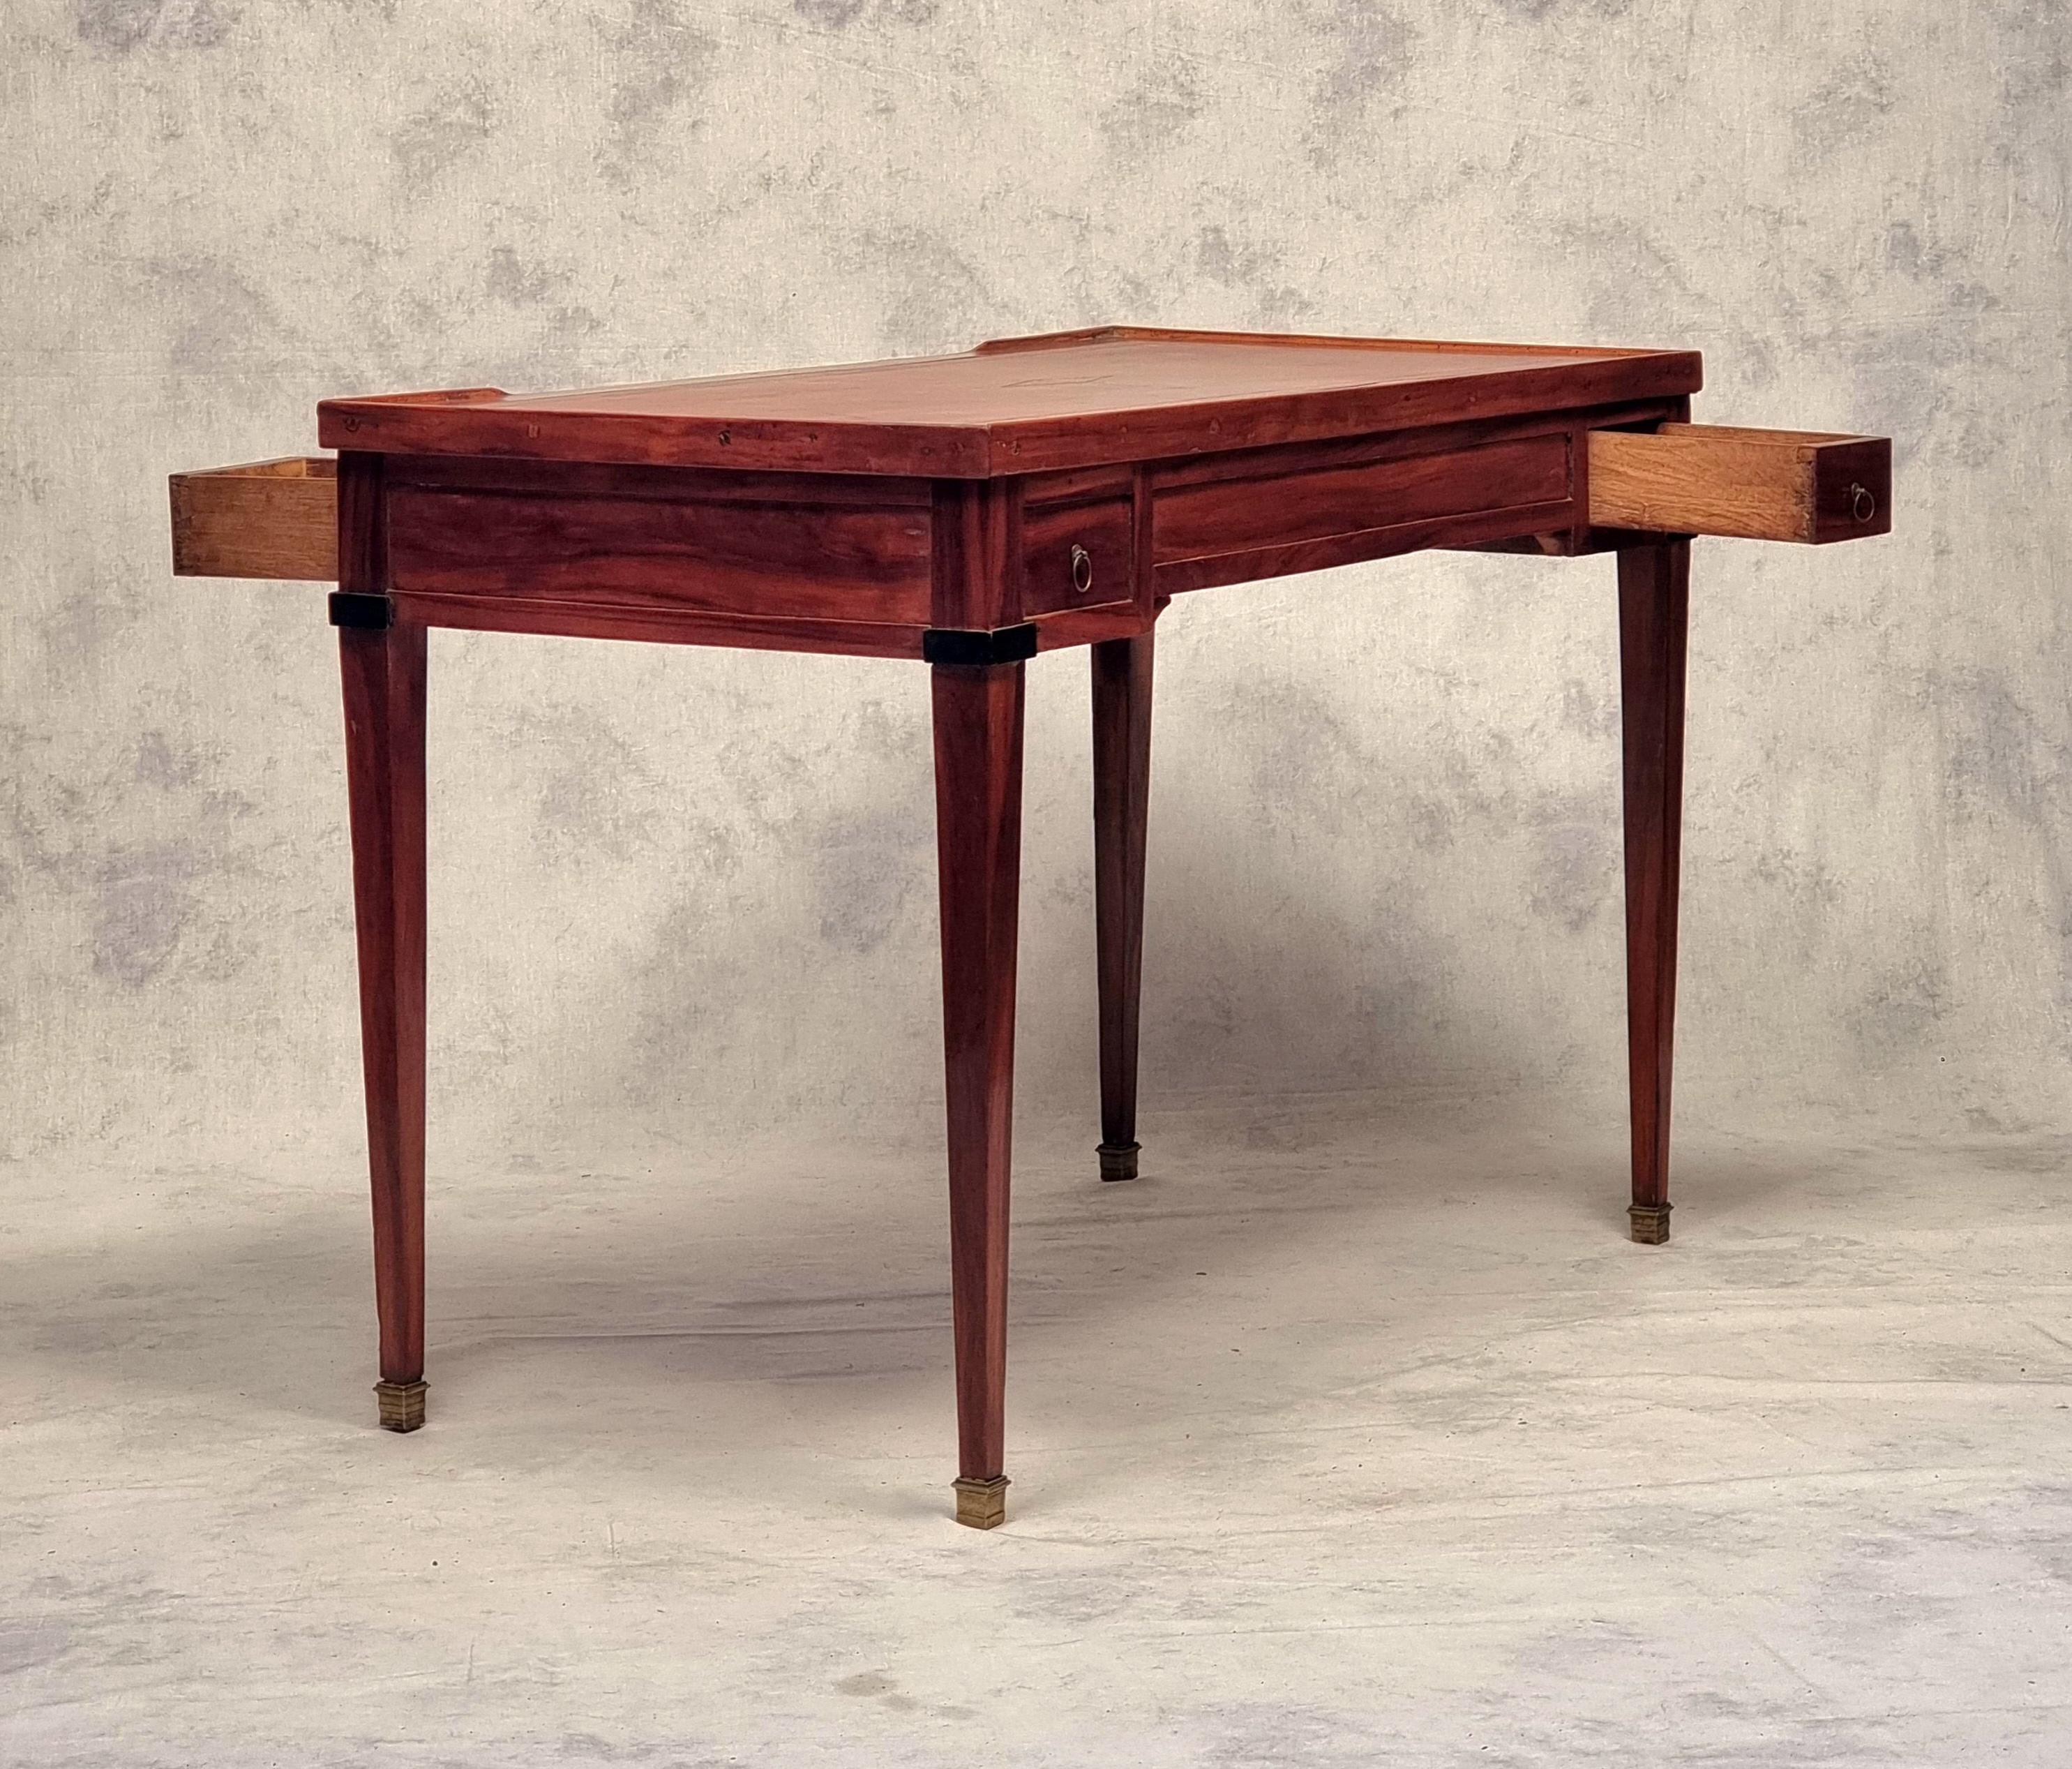 Wood Directoire Period Games Table - Rosewood & Ebony - 18th For Sale